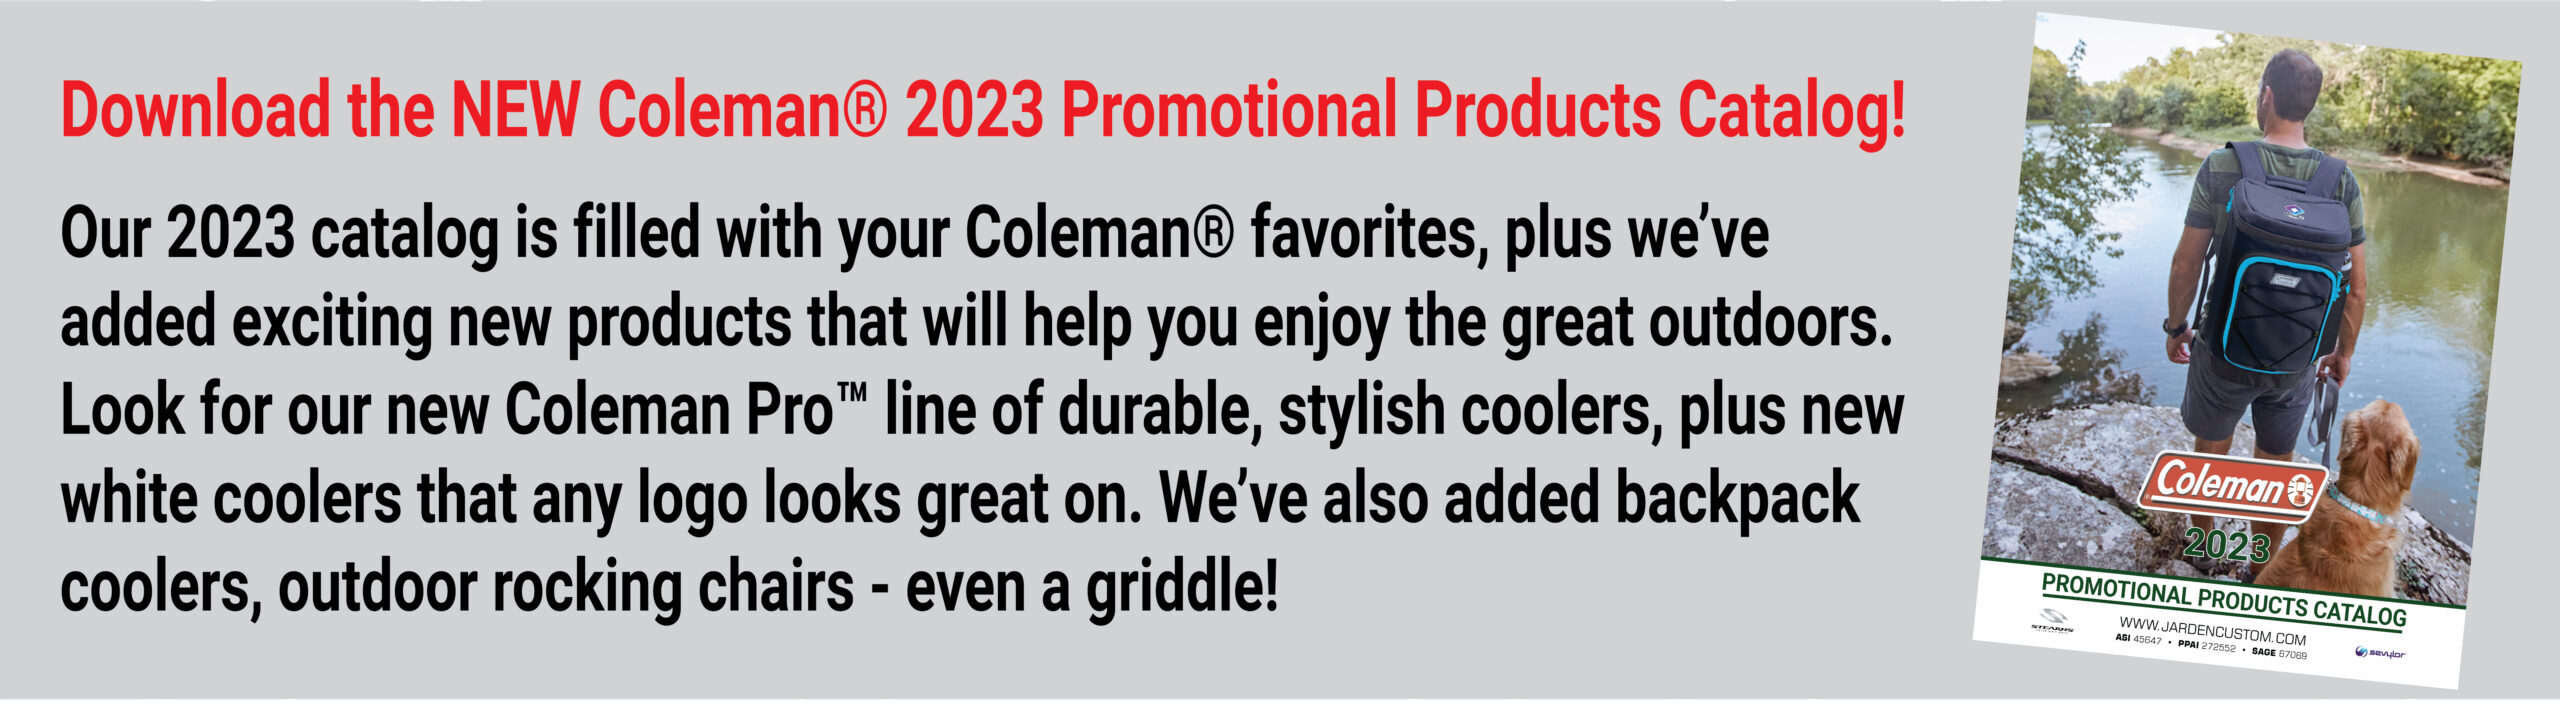 Coleman 2023 Promotional Products Catalog